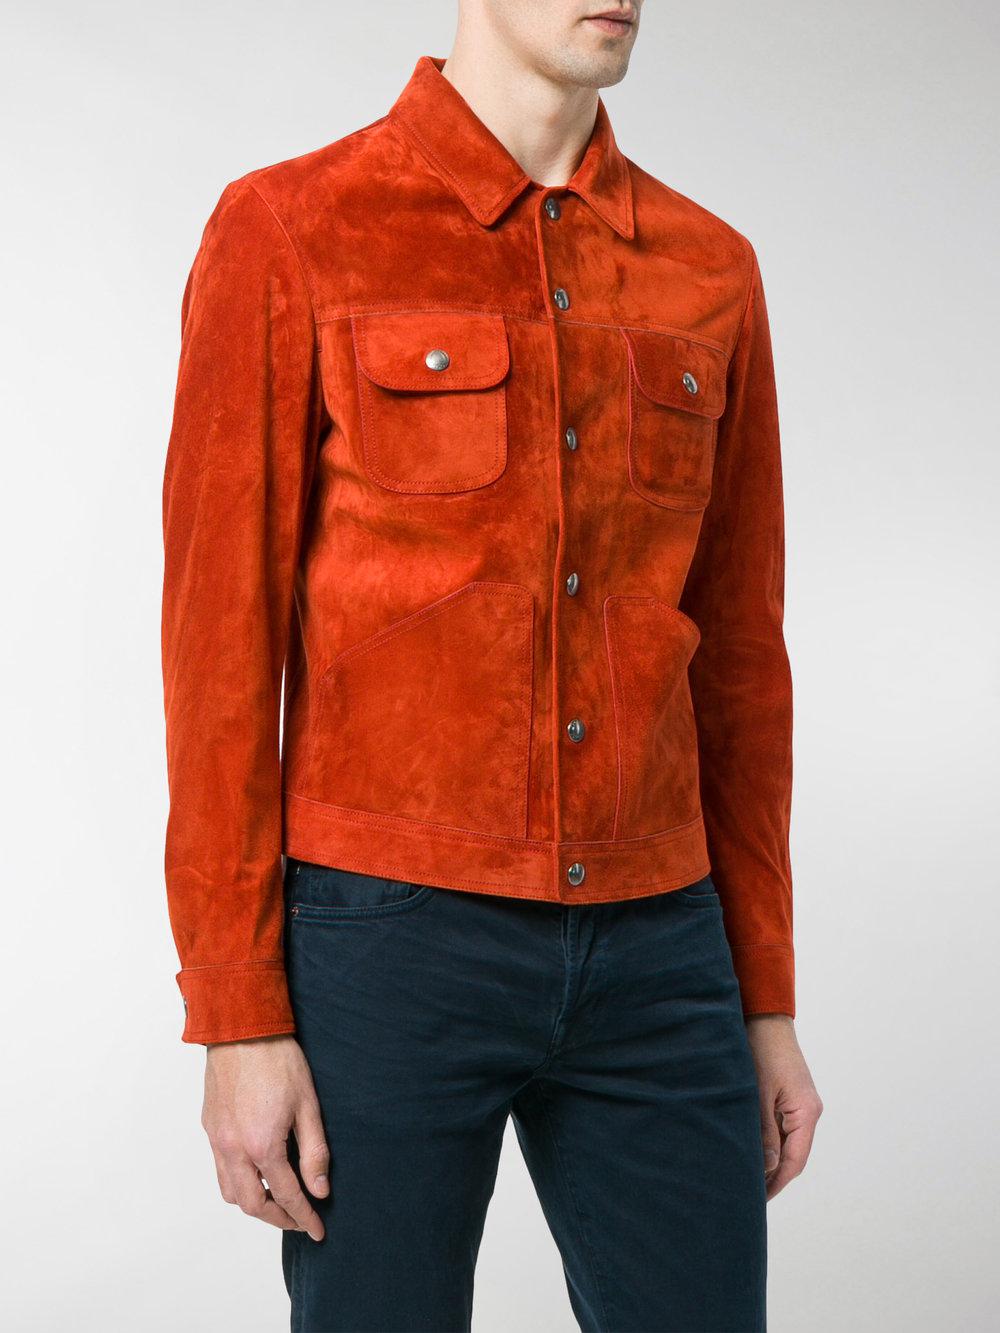 Tom Ford Fitted Suede Jacket in Yellow & Orange (Orange) for Men | Lyst